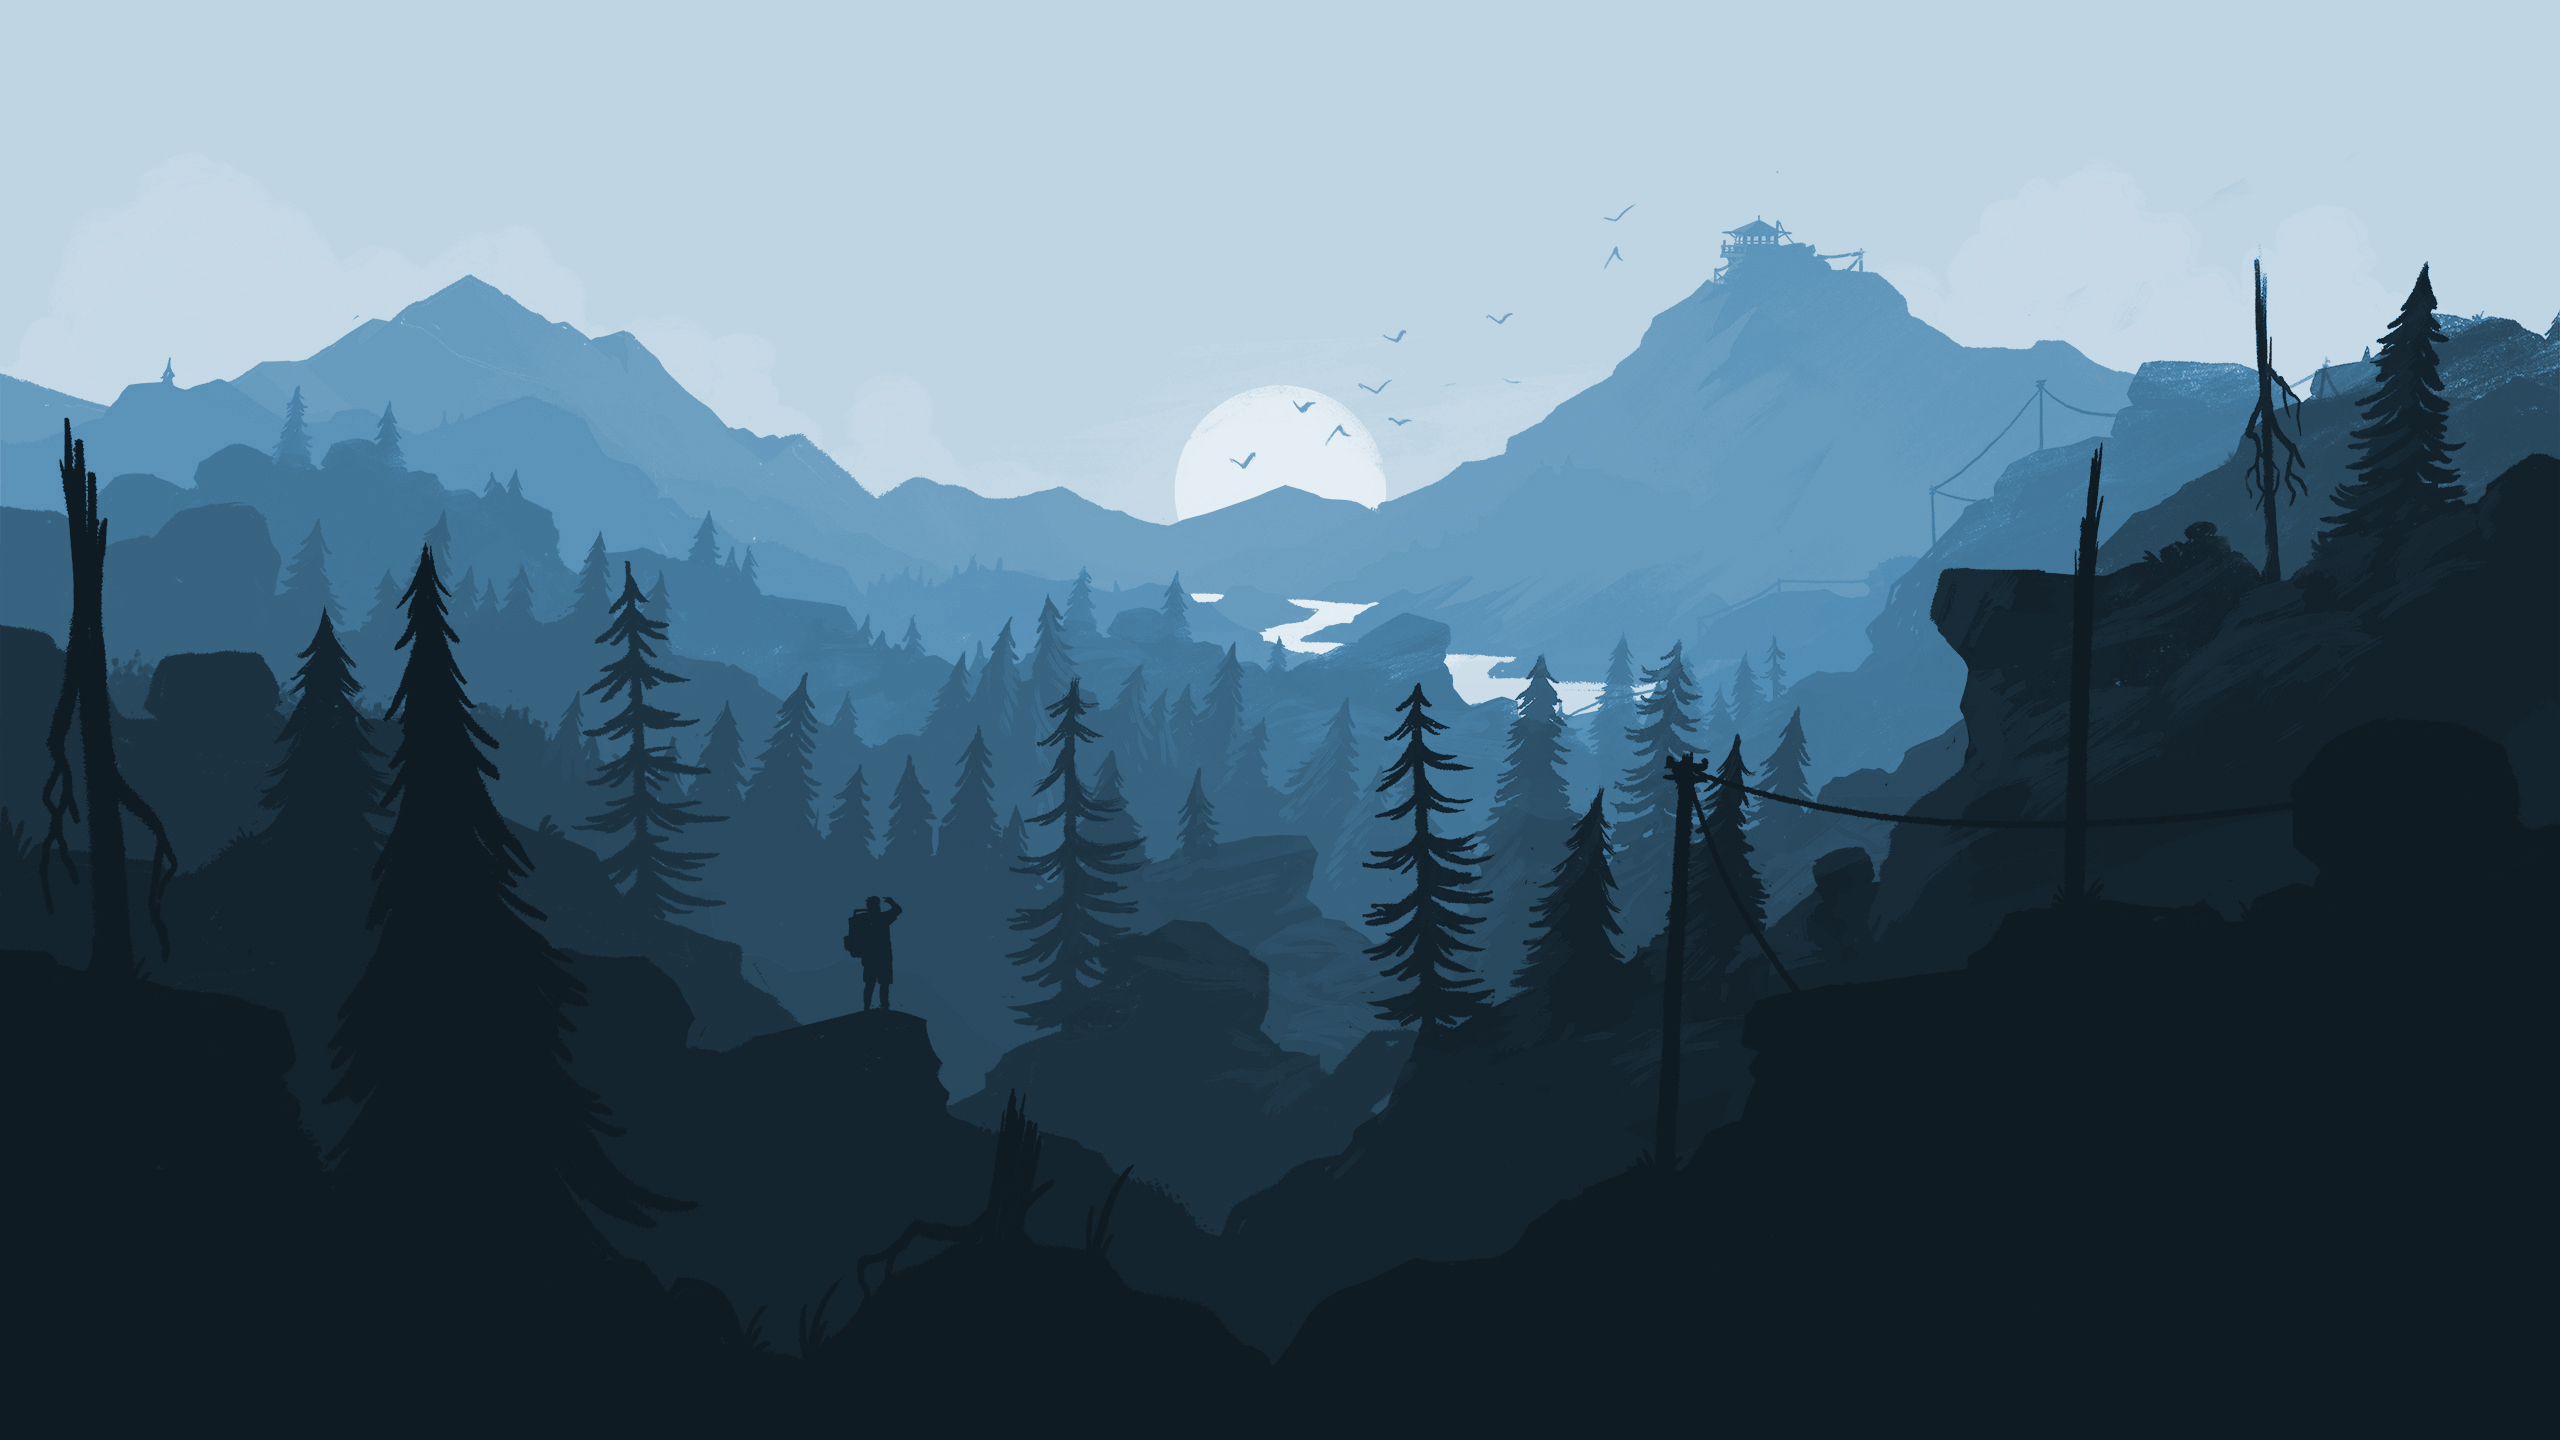 General 2560x1440 Firewatch digital art forest trees mountains river Sun outdoors silhouette